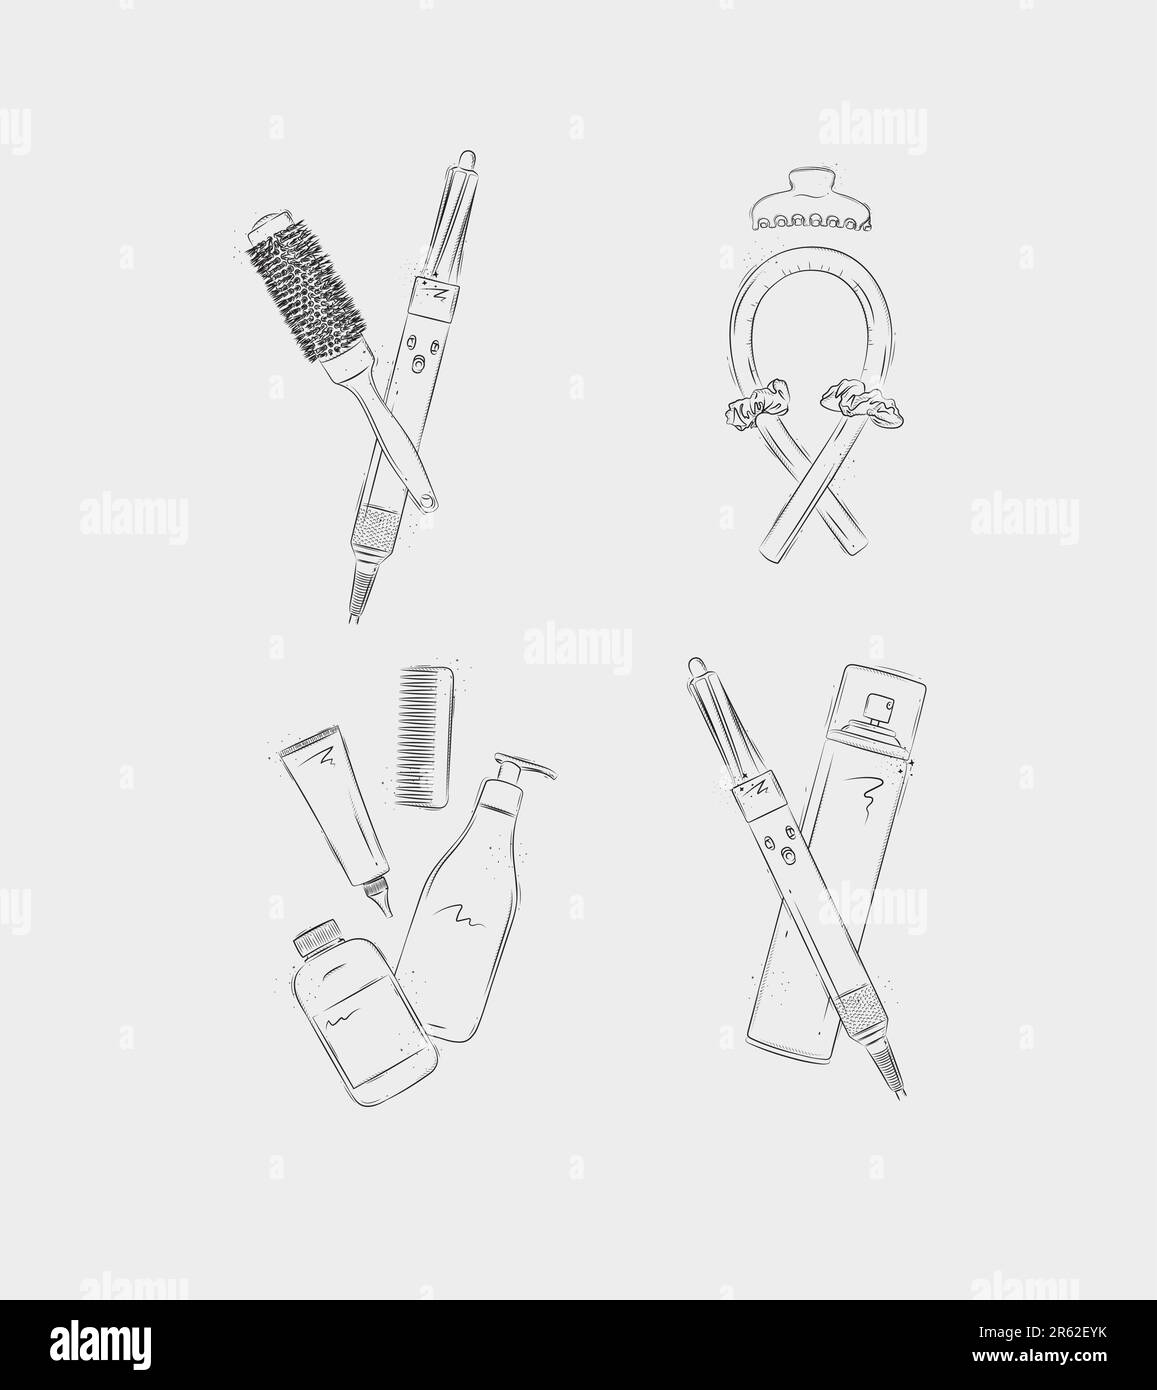 Curl syling tools composition drawing on light background Stock Vector